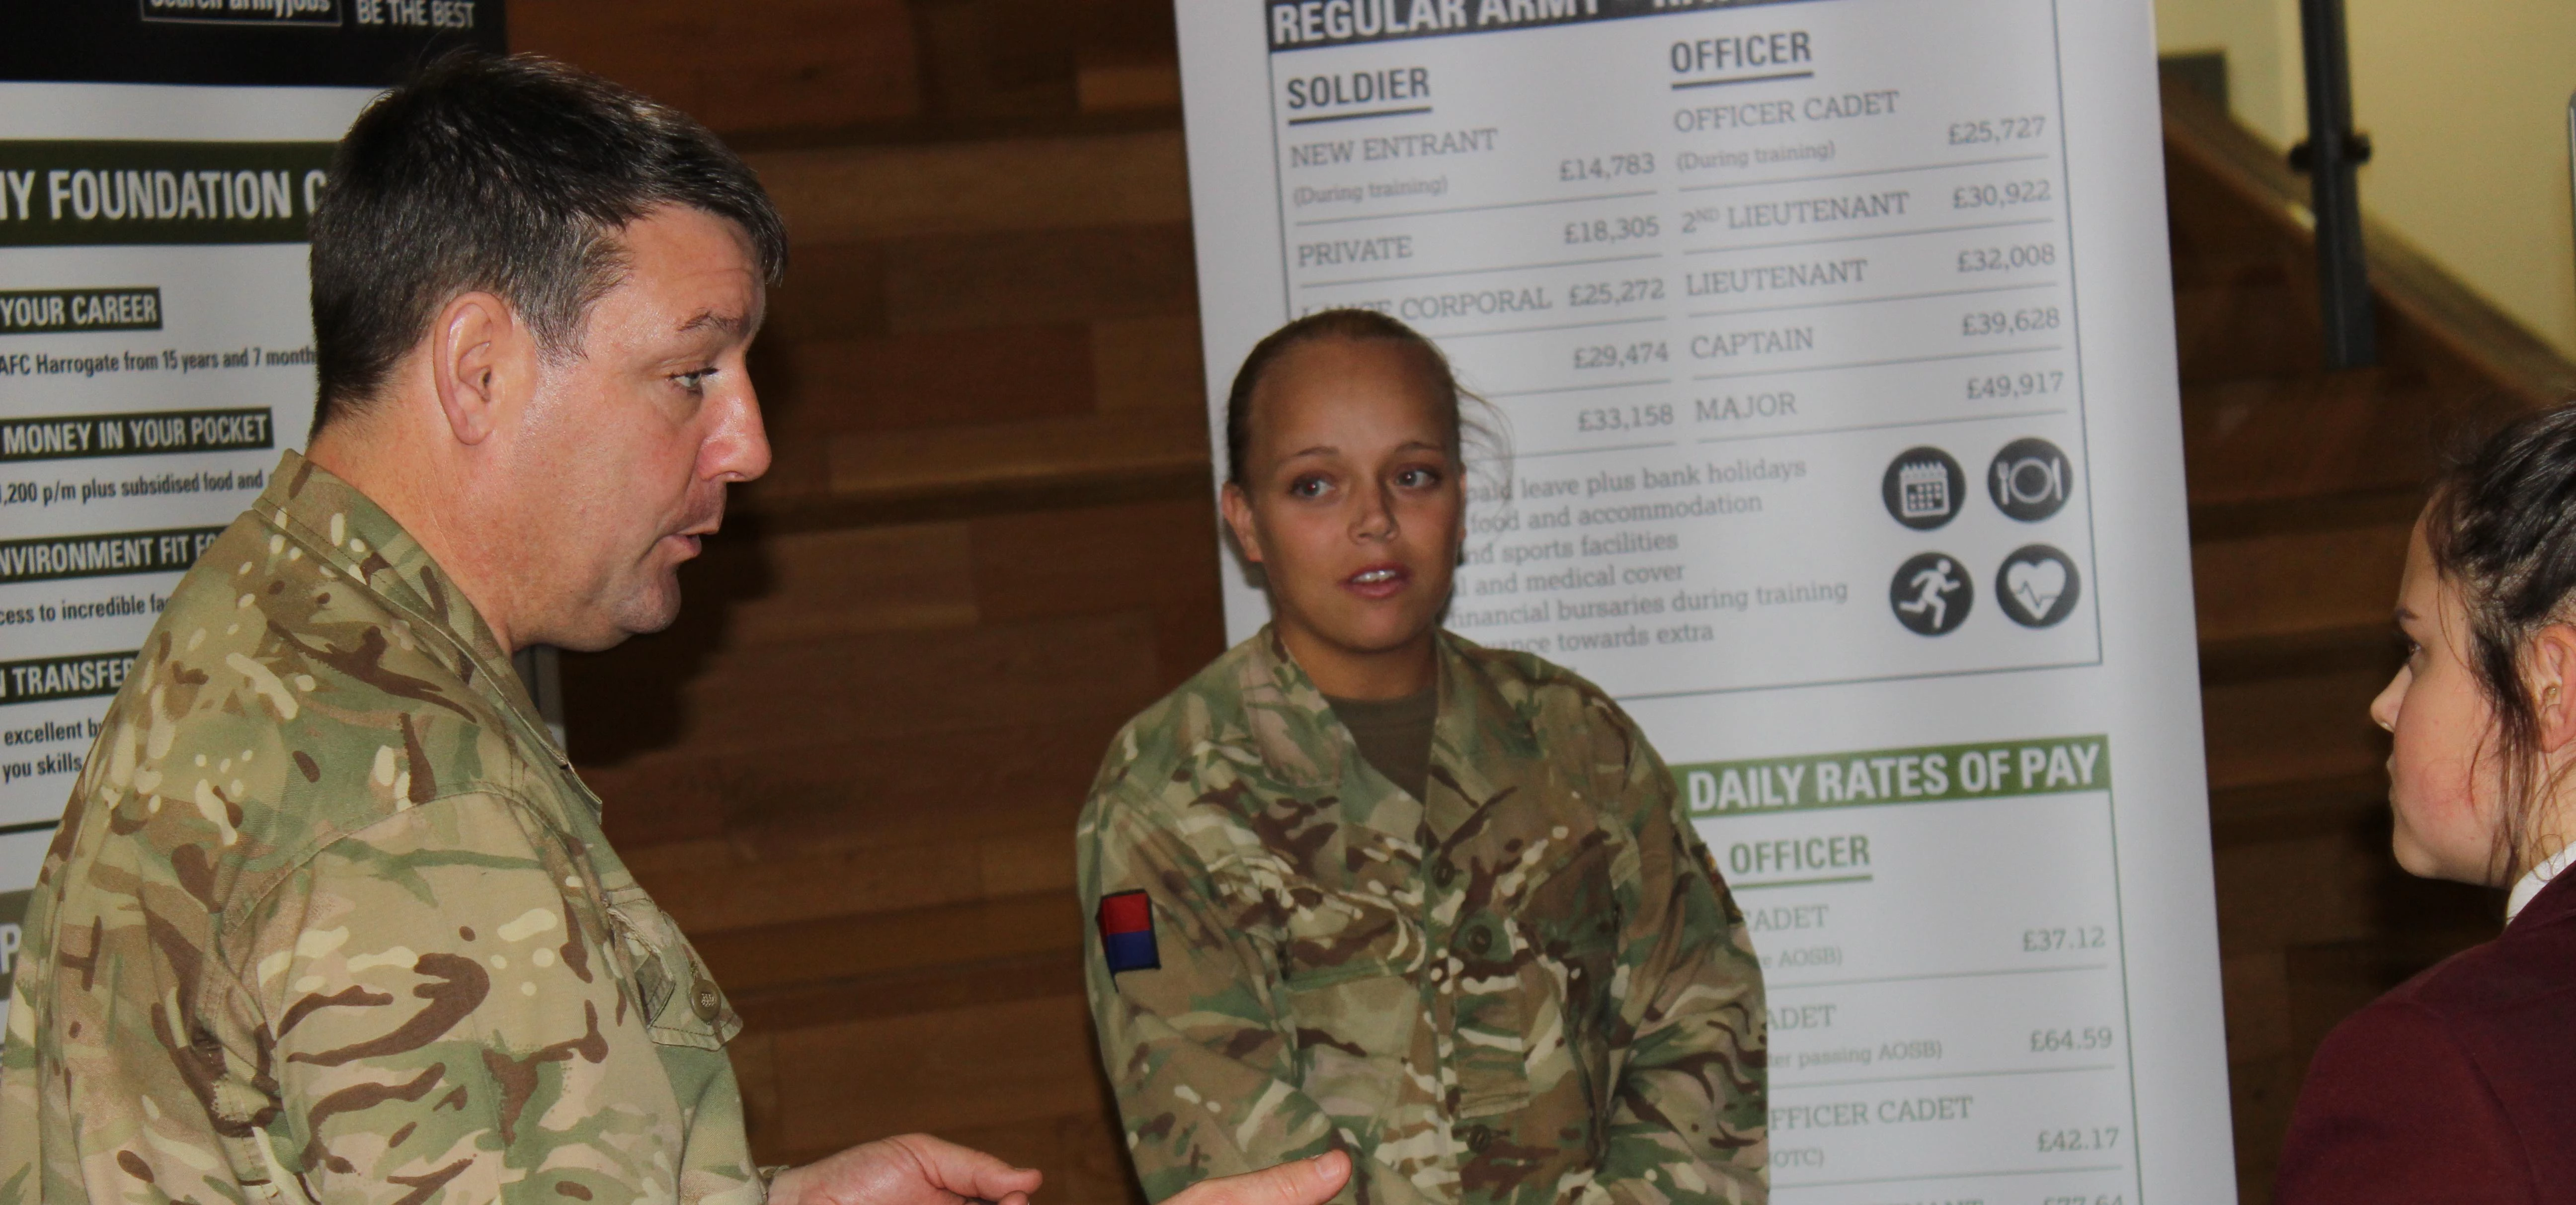 Representatives from The Armed Forces offered advice on the day